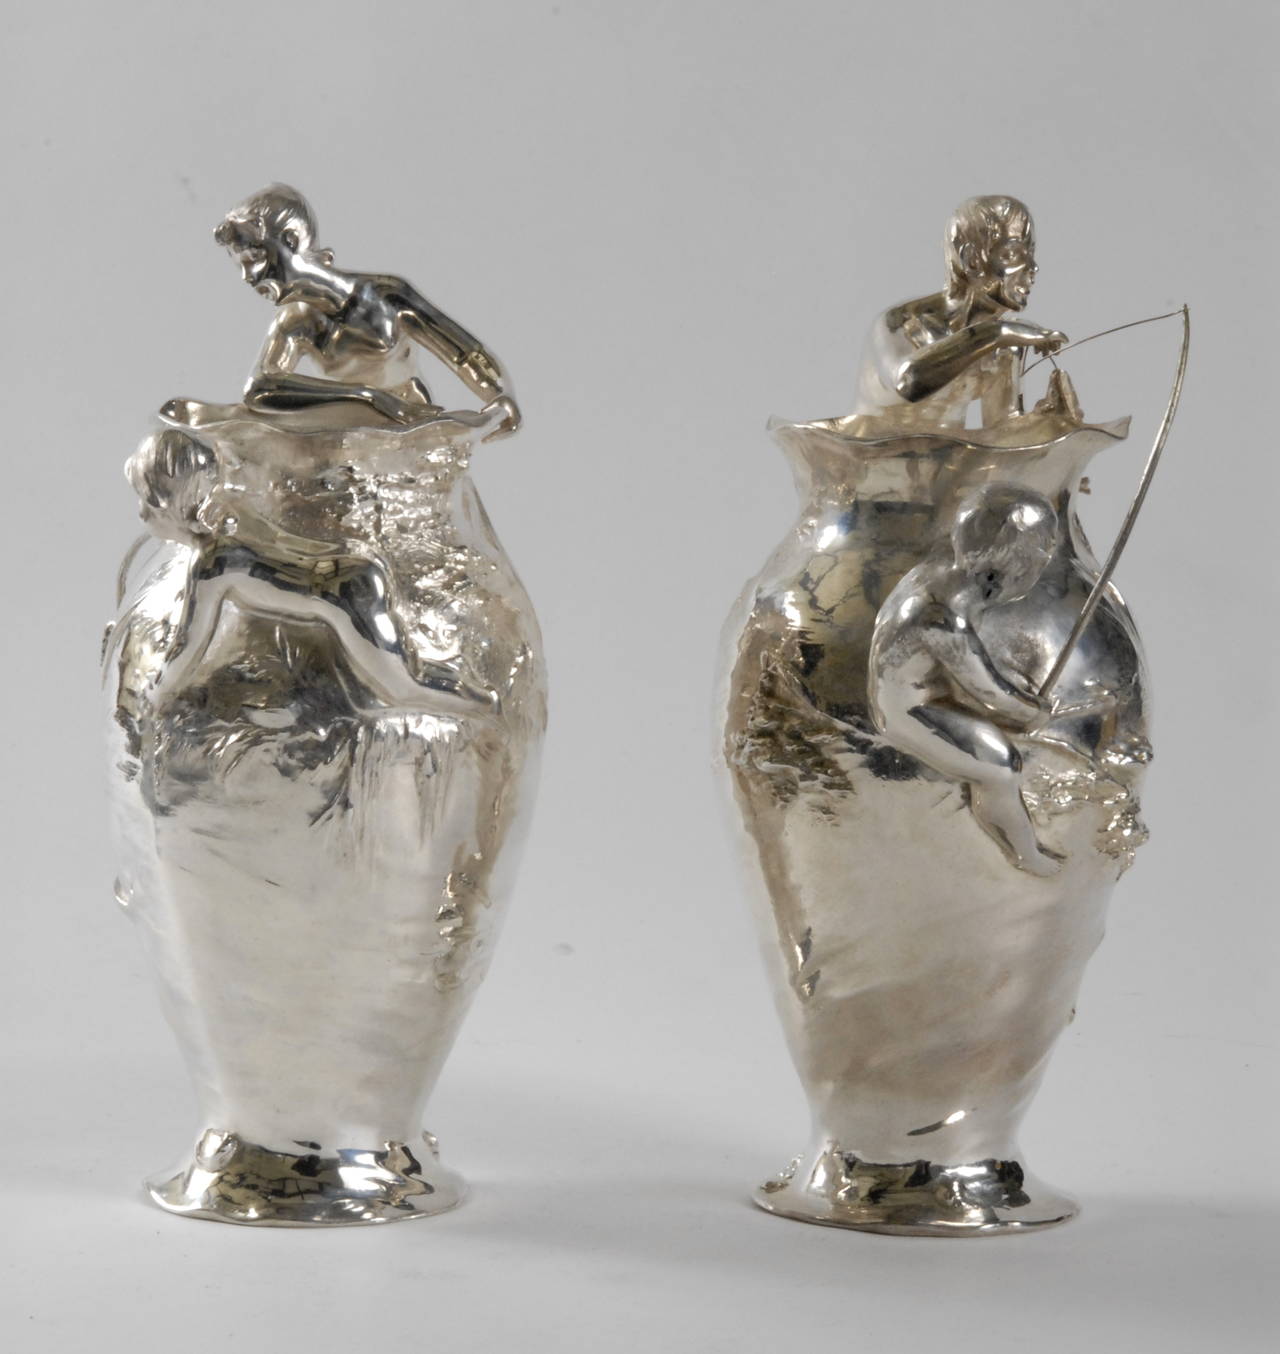 A pair of WMF [Wurttembergische Metallwarenfabrik] flower vases decorated with a fisherman and fisherwoman with children. Silver plated pewter and high relief decoration. The vases have been re-plated and the fishing rods and lines are replacements